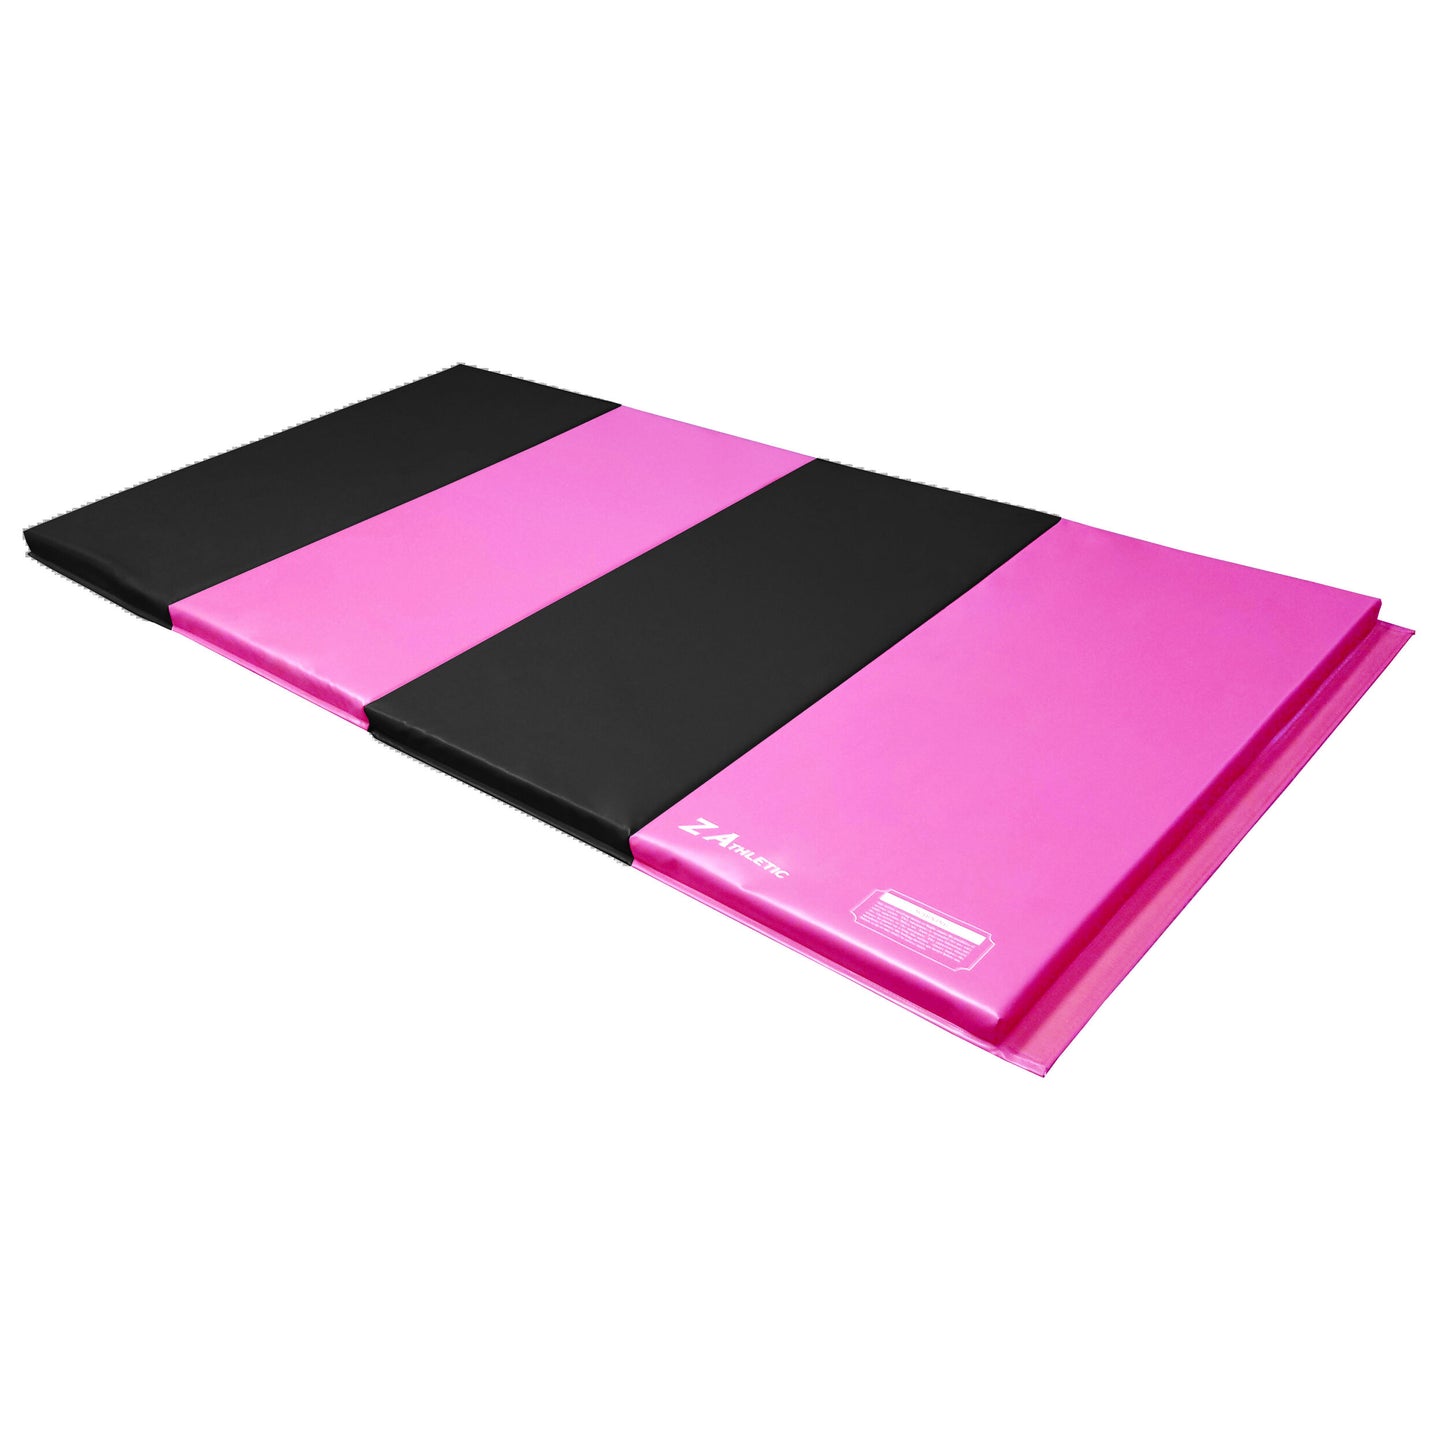 Z Athletic 4ft x 8ft x 2in Gymnastics Mat